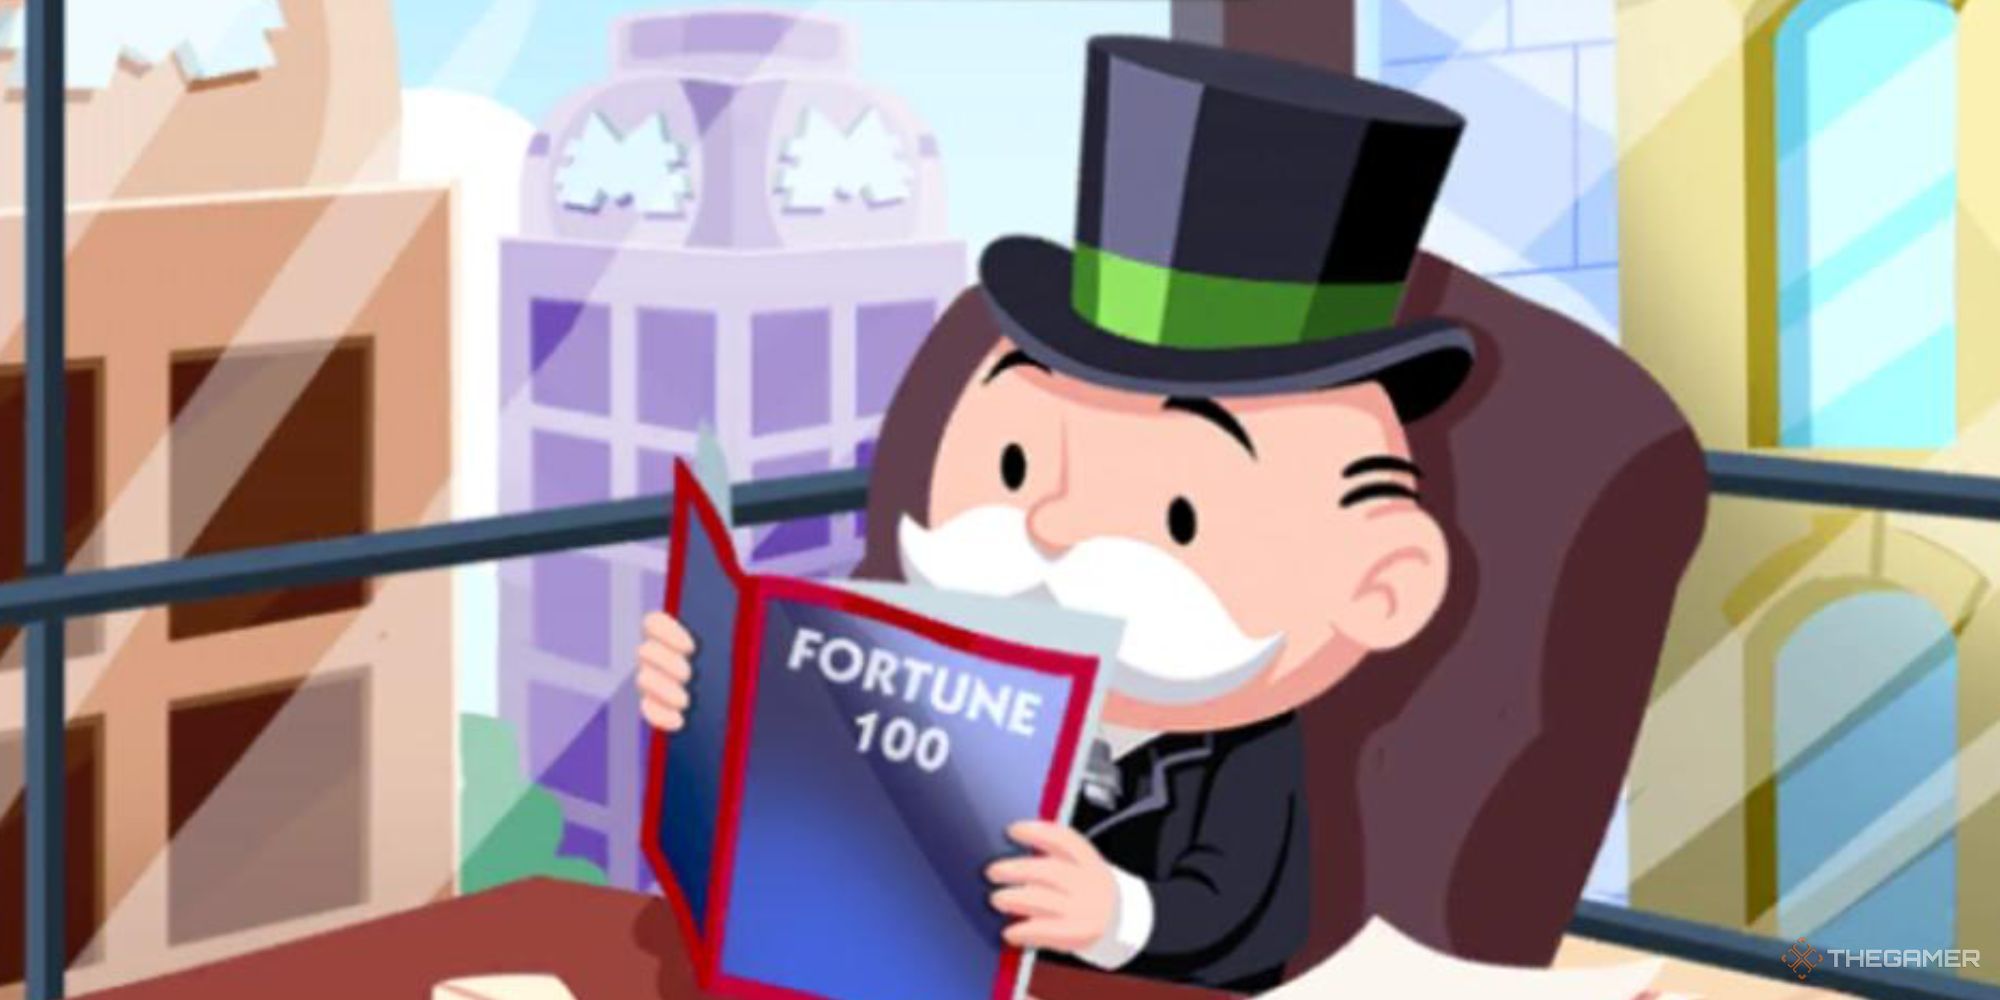 Mr. Monopoly reading a book titled Fortune 100 in Monopoly Go.